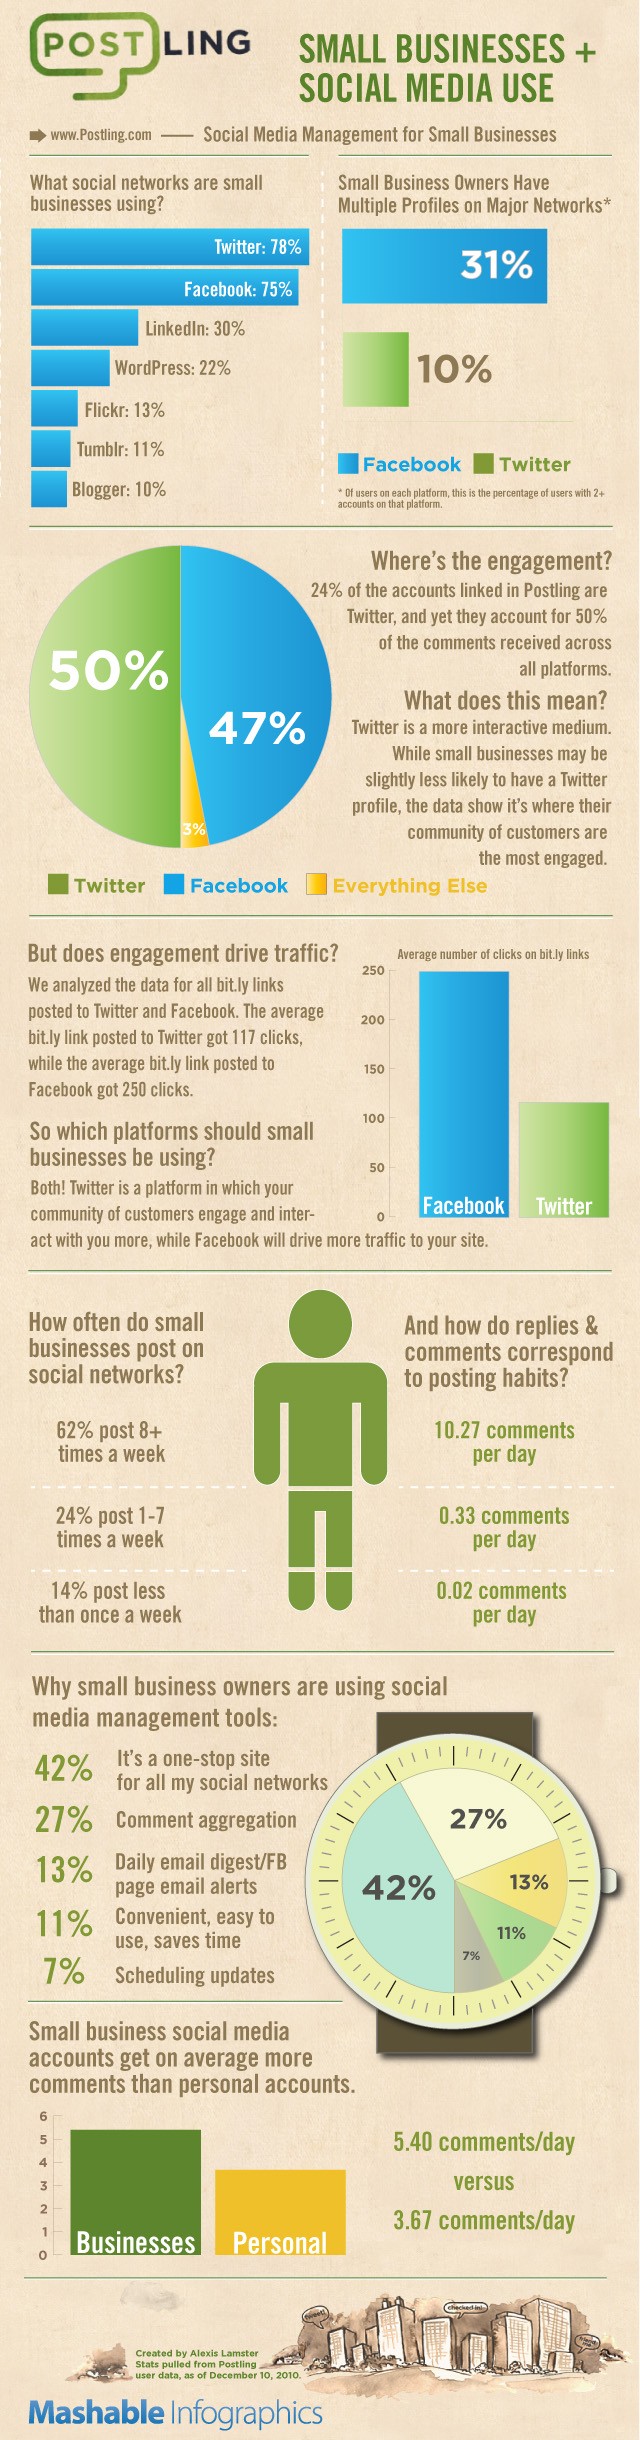 Small Businesses + Social Media Use